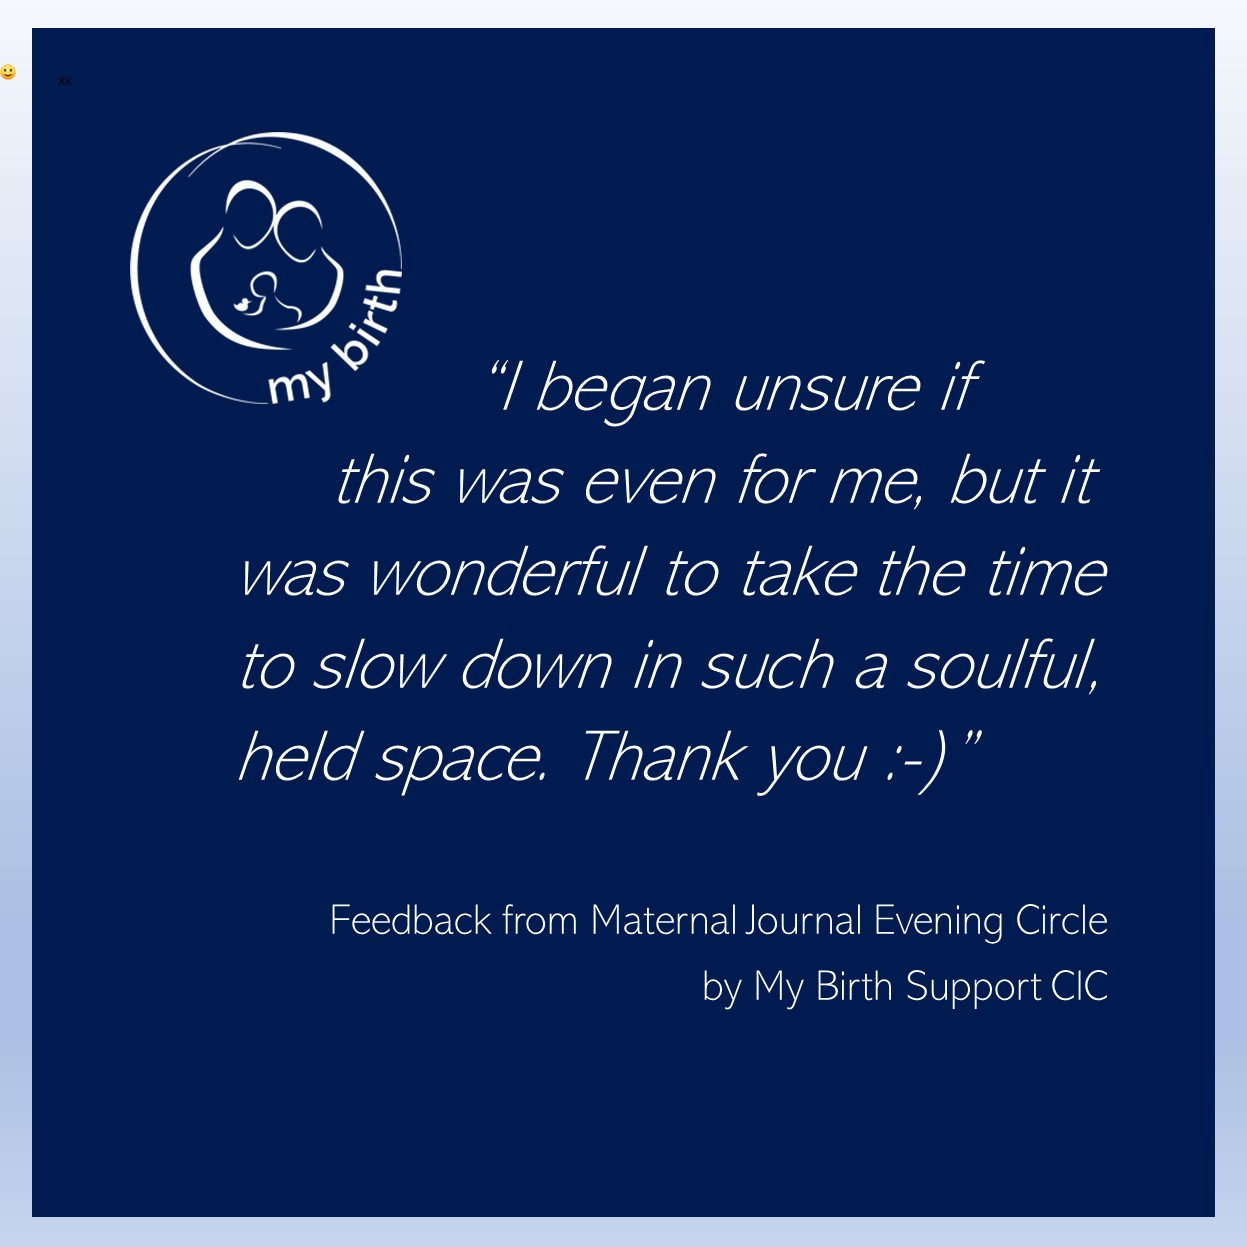 Feedback from a parent at Maternal Journal by My Birth Support CIC: “I began unsure if this was even for me, but it was wonderful to take the time to slow down in such a soulful, held space. Thank you :-)”